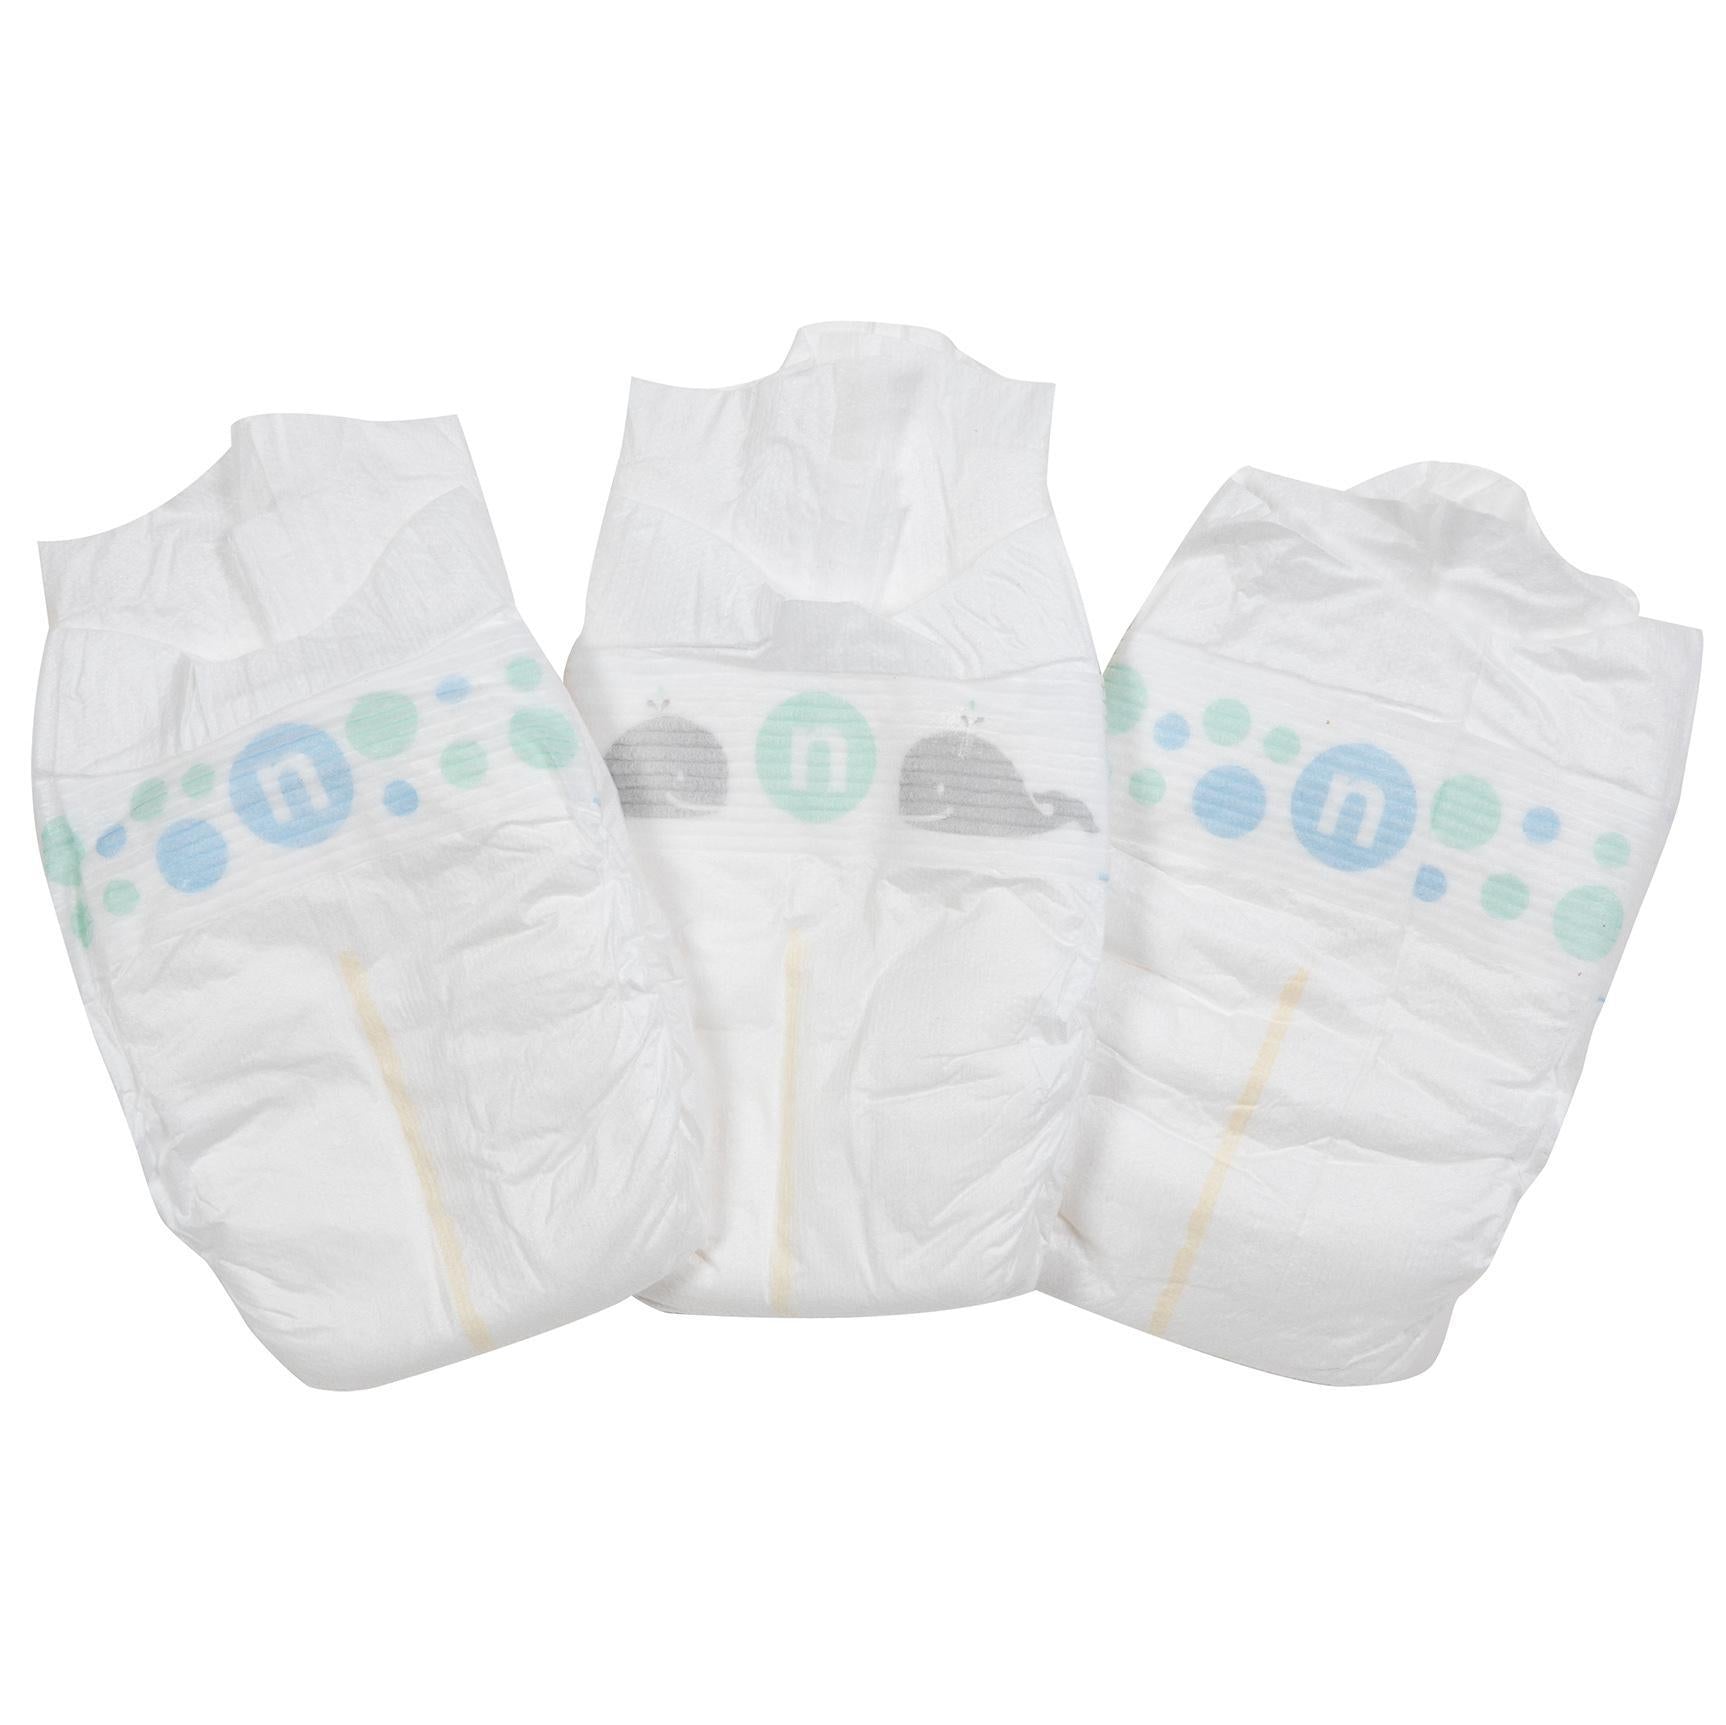 BLC Diapers 3-Pack fits 17 Exclusive Babies Cabbage Patch Kids